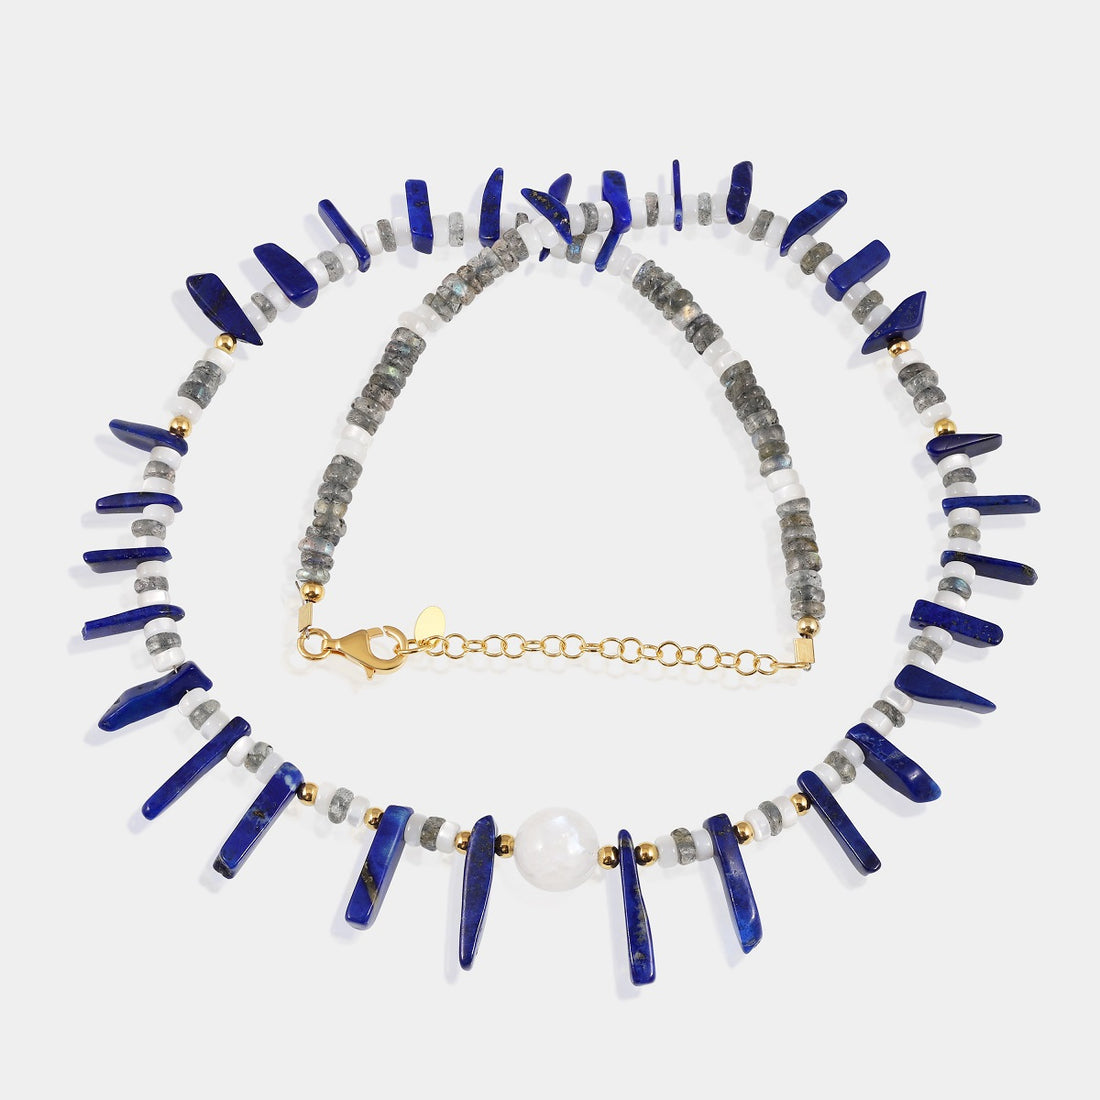 Handmade 925 silver necklace adorned with Lapis Lazuli, Labradorite, Mother of Pearl, and Rainbow Moonstone gemstone beads